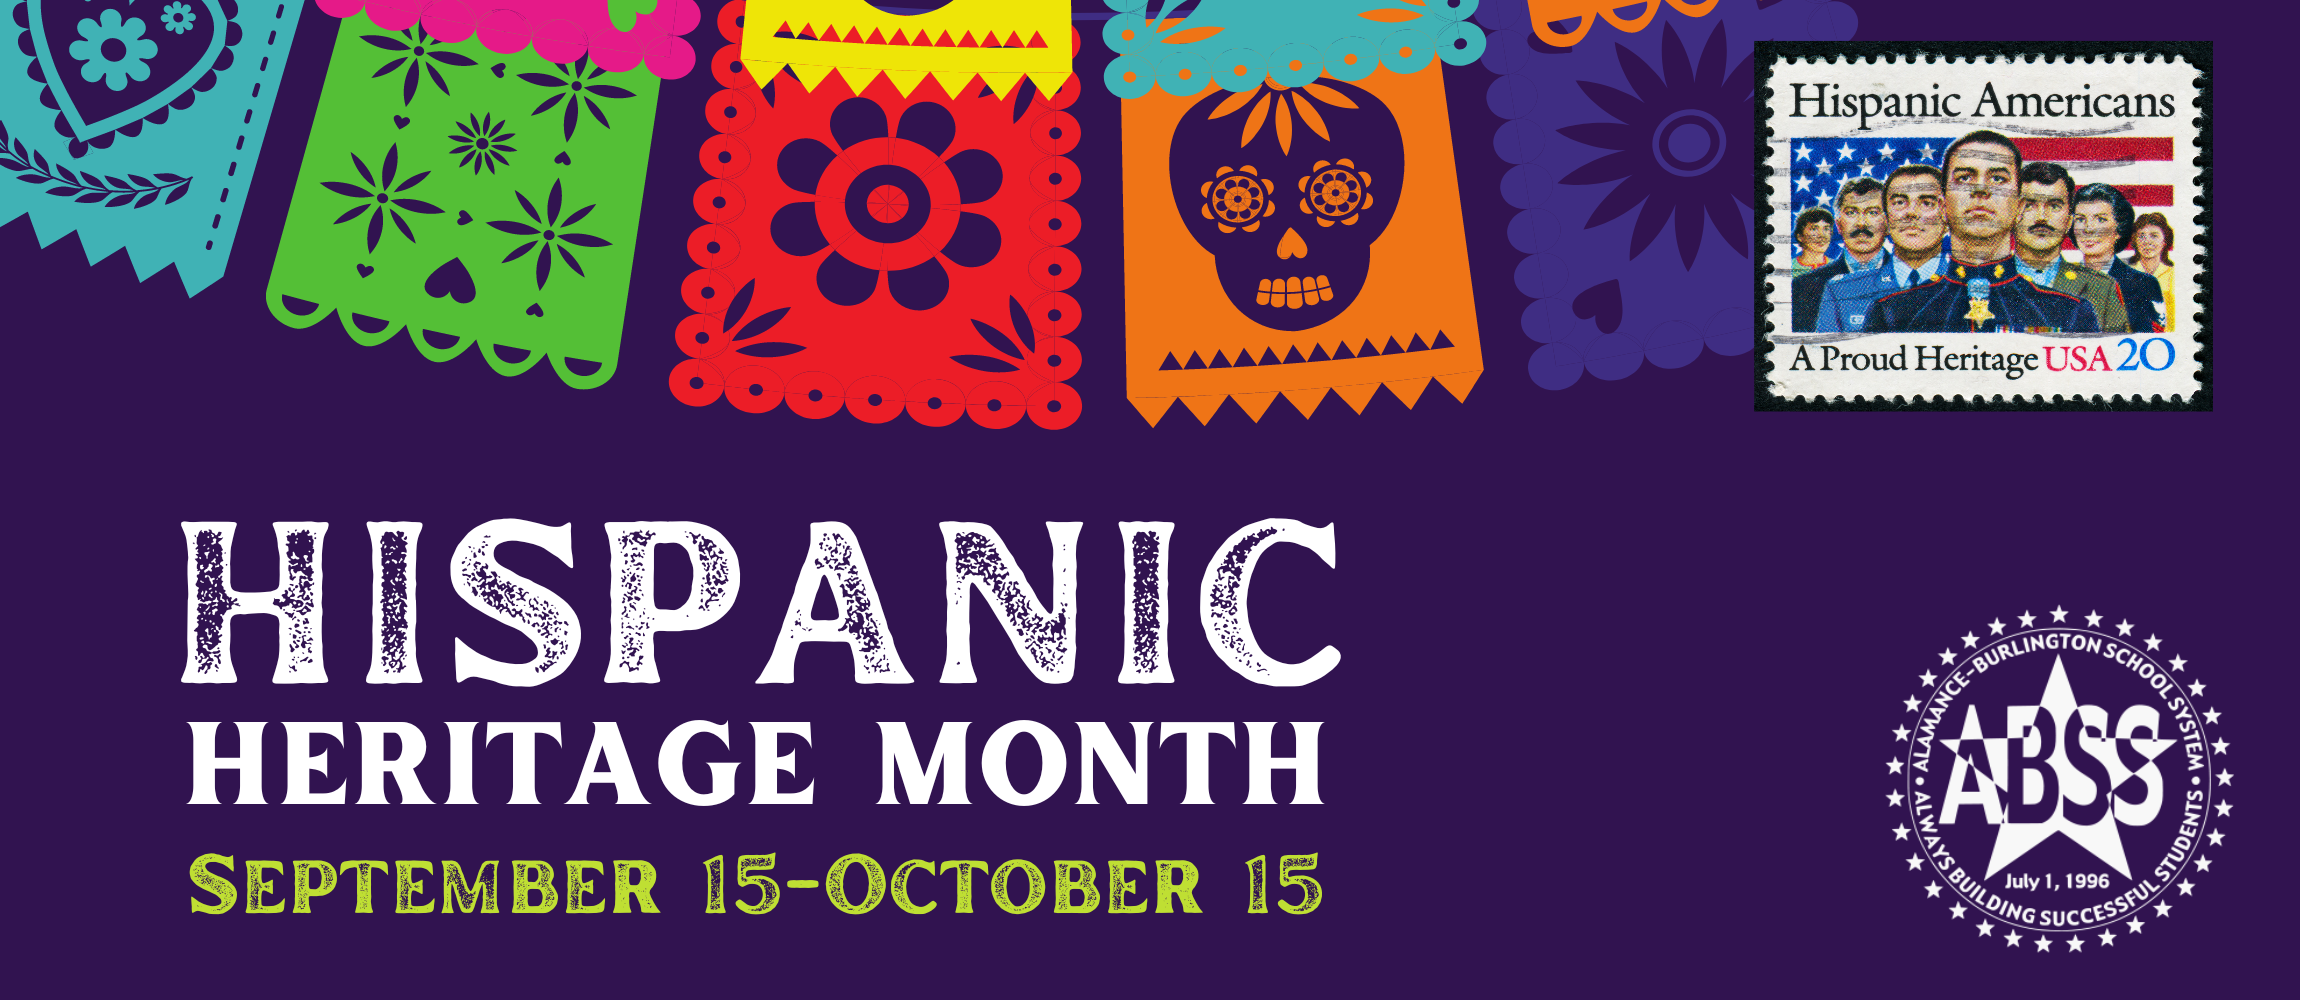 Hispanic Heritage Month banner with the dates September 15-October 15